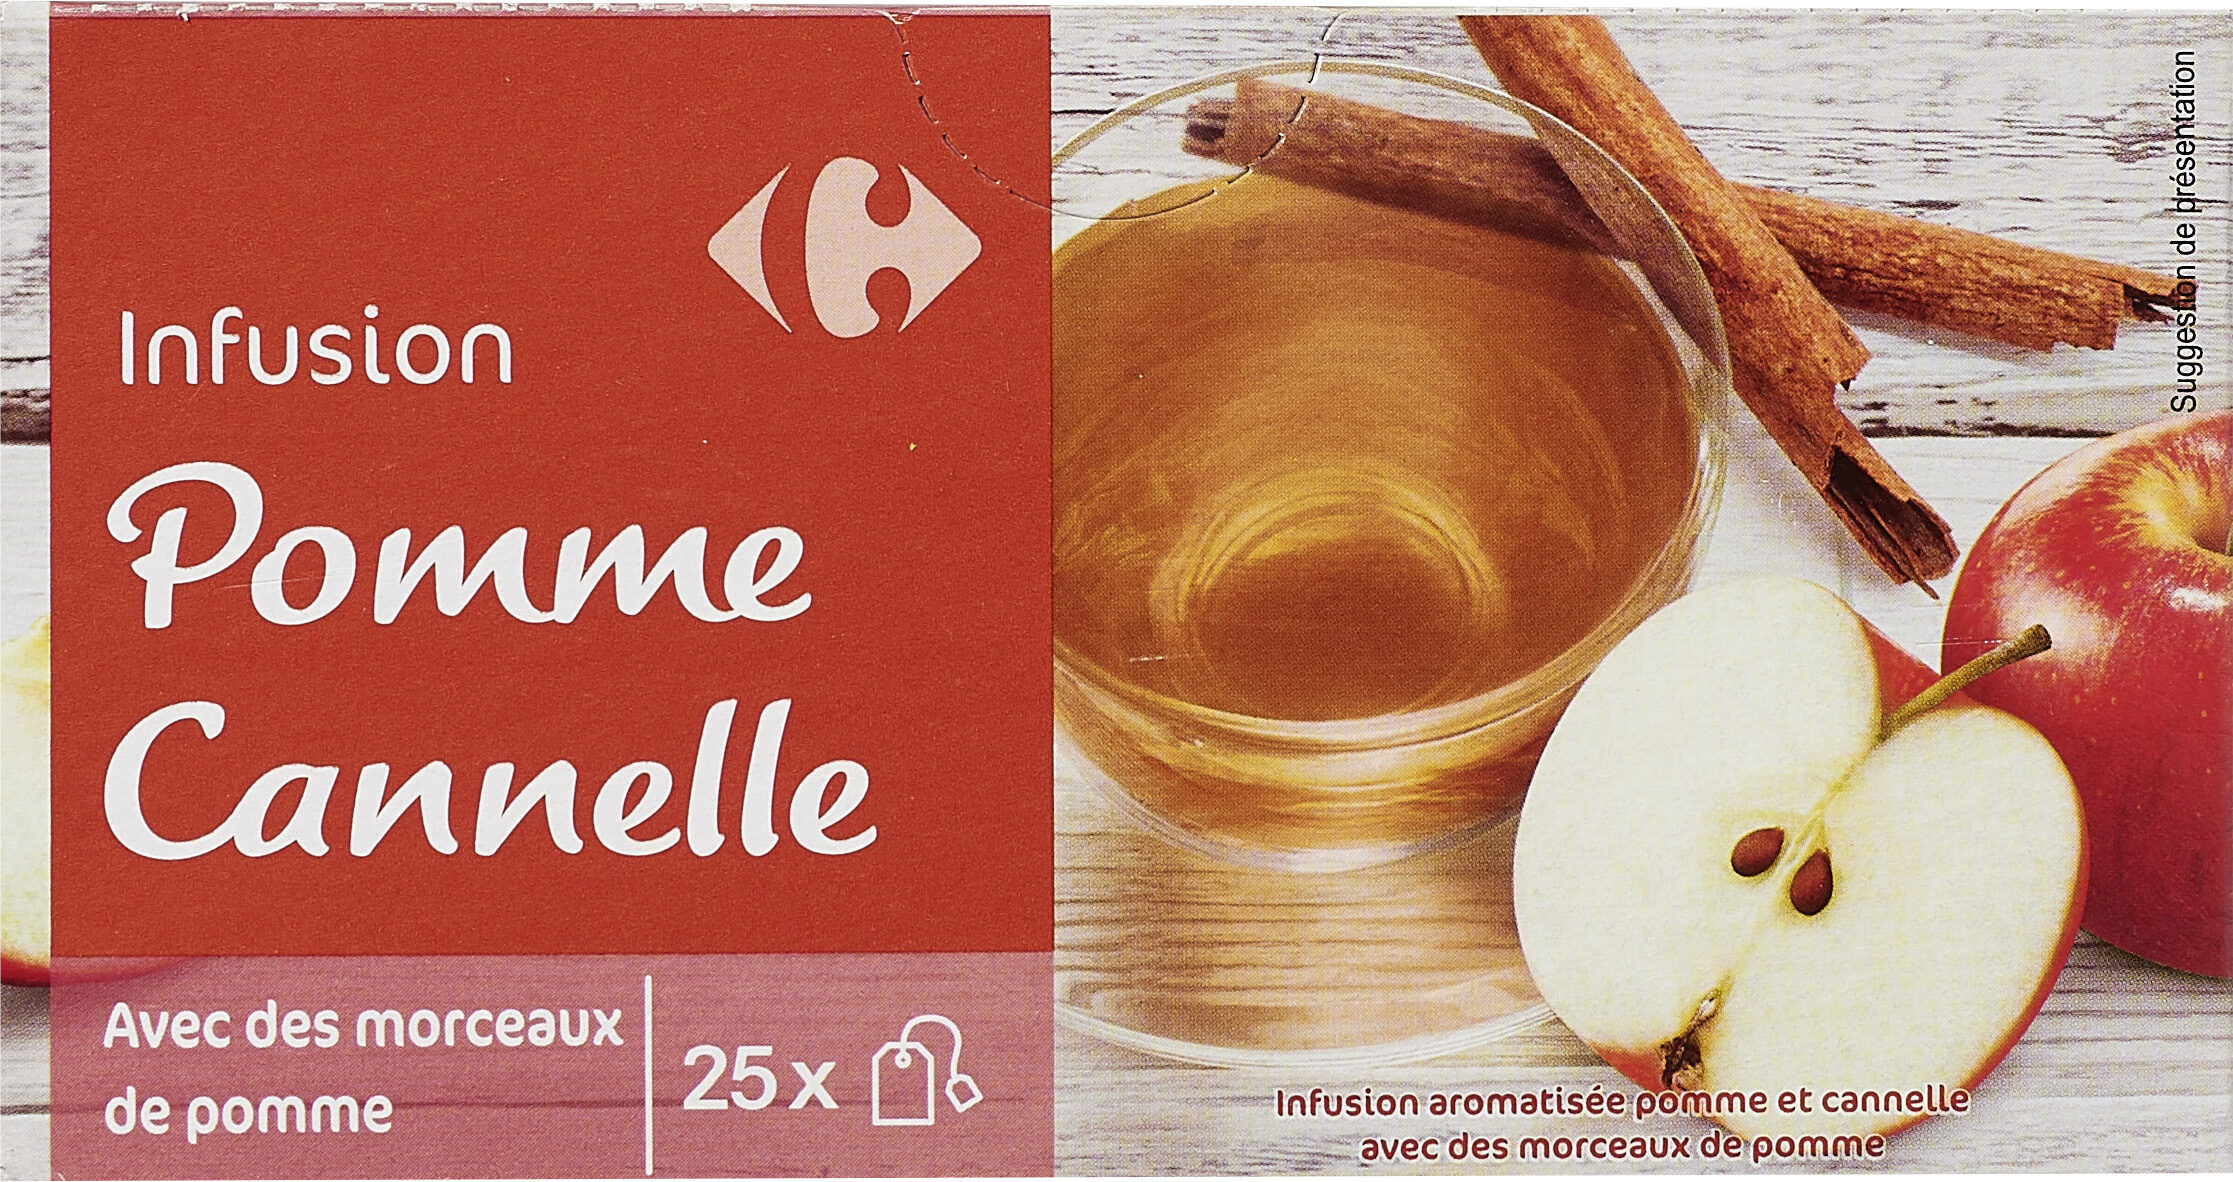 Infusion Pomme Cannelle - Producte - fr